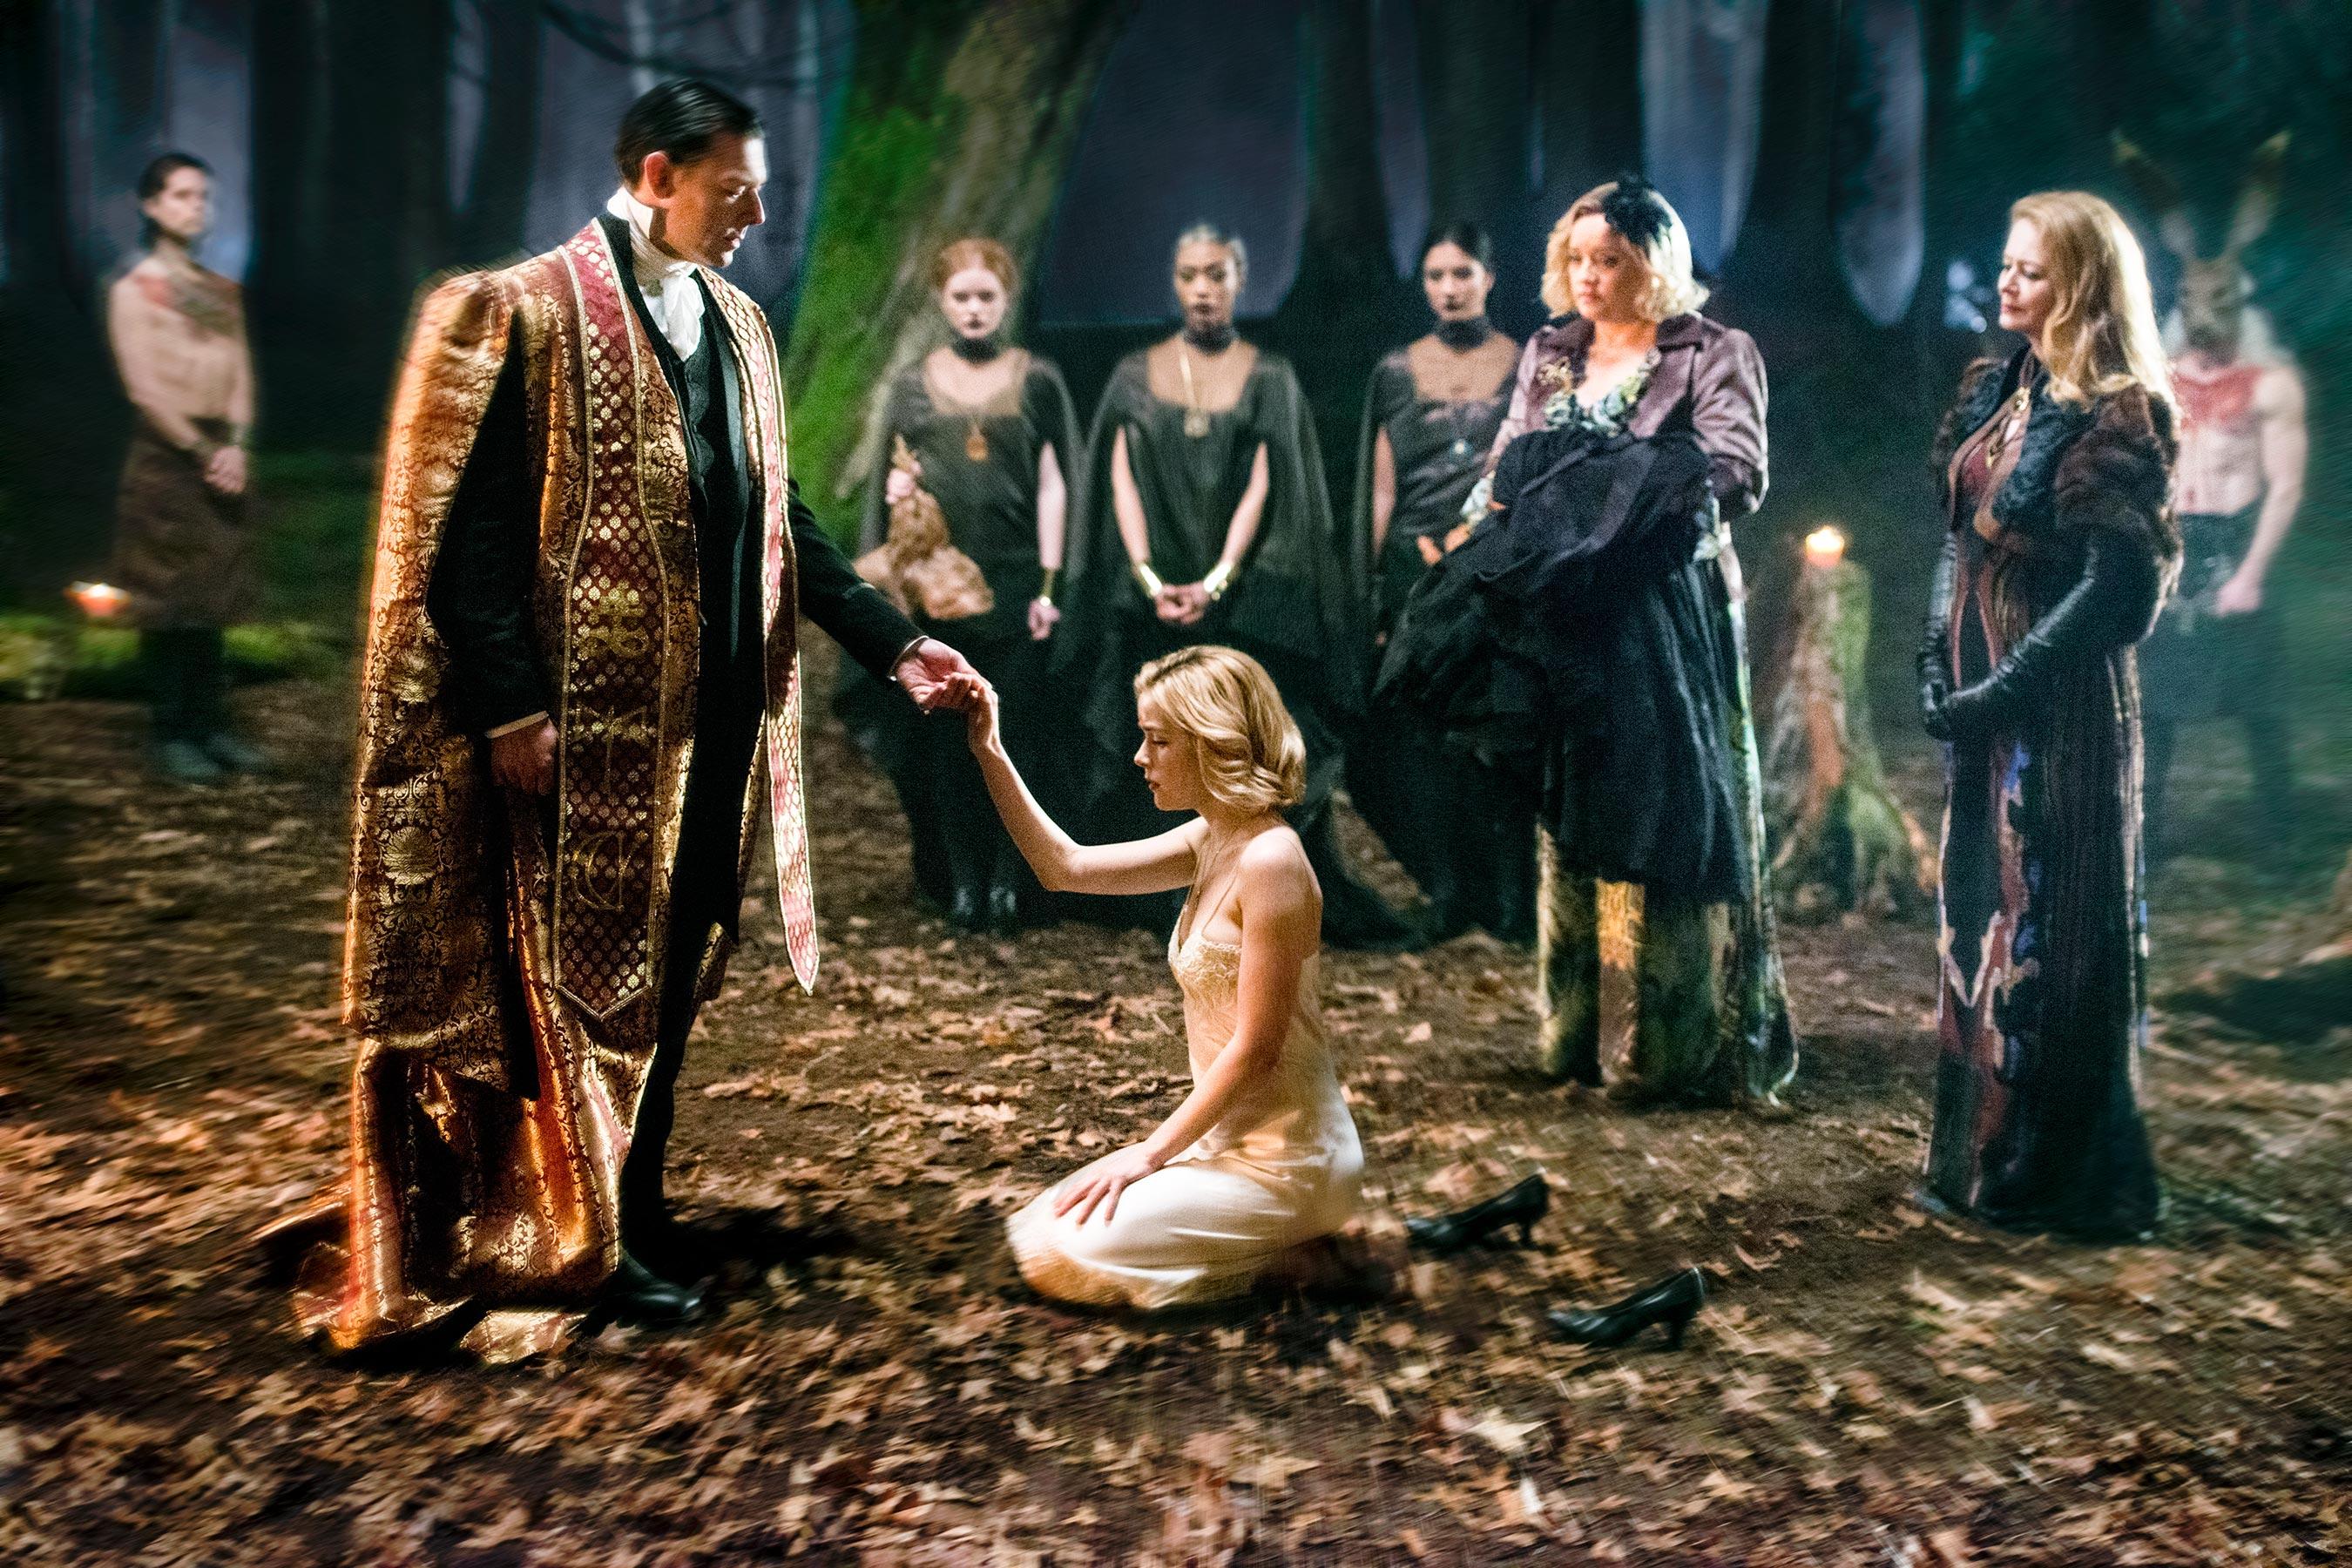 New Chilling Adventures of Sabrina Image Tease Netflix's